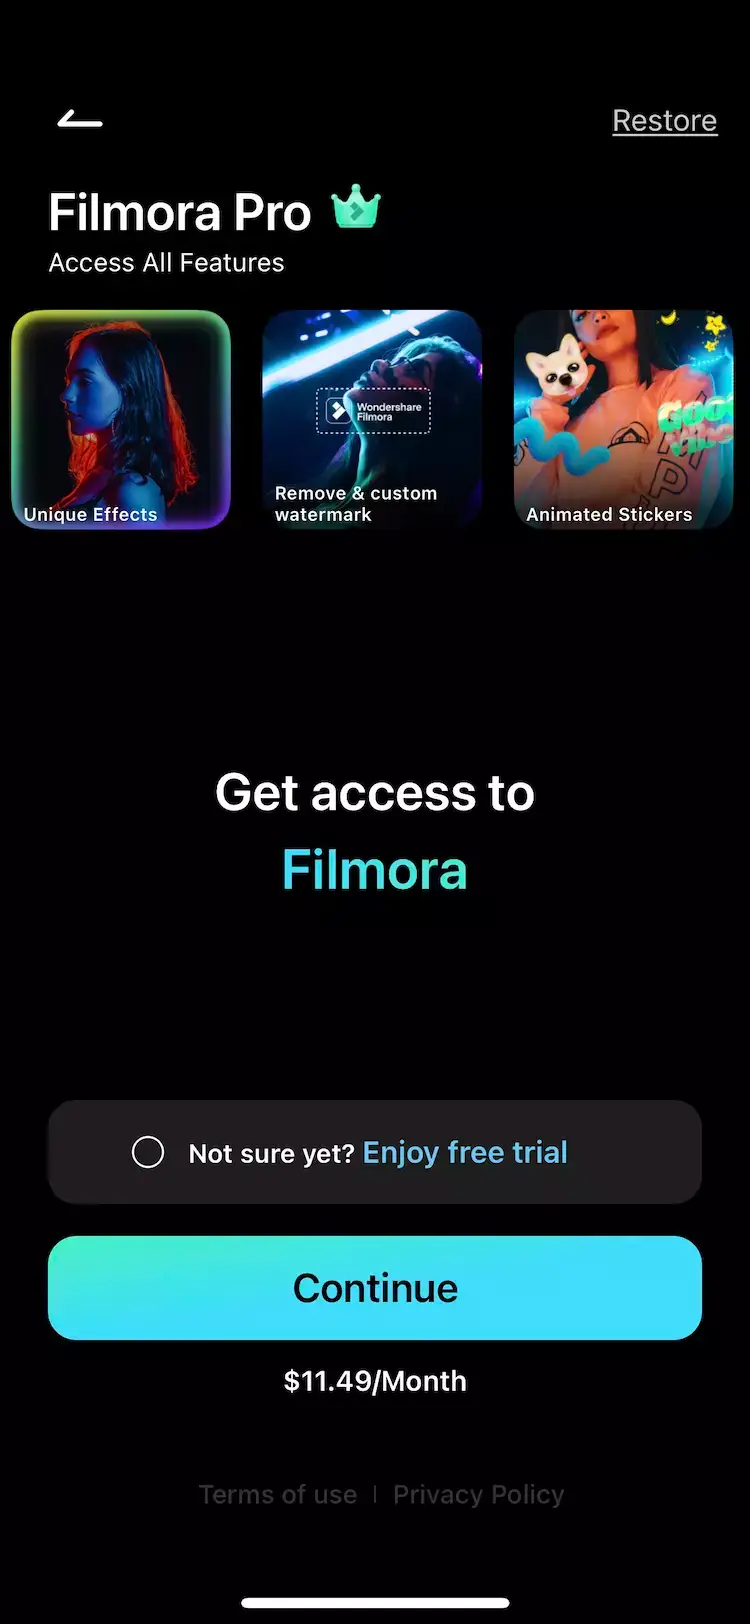 A mobile paywall design example by Filmora - Video Editor, Maker from the Photo and Video category